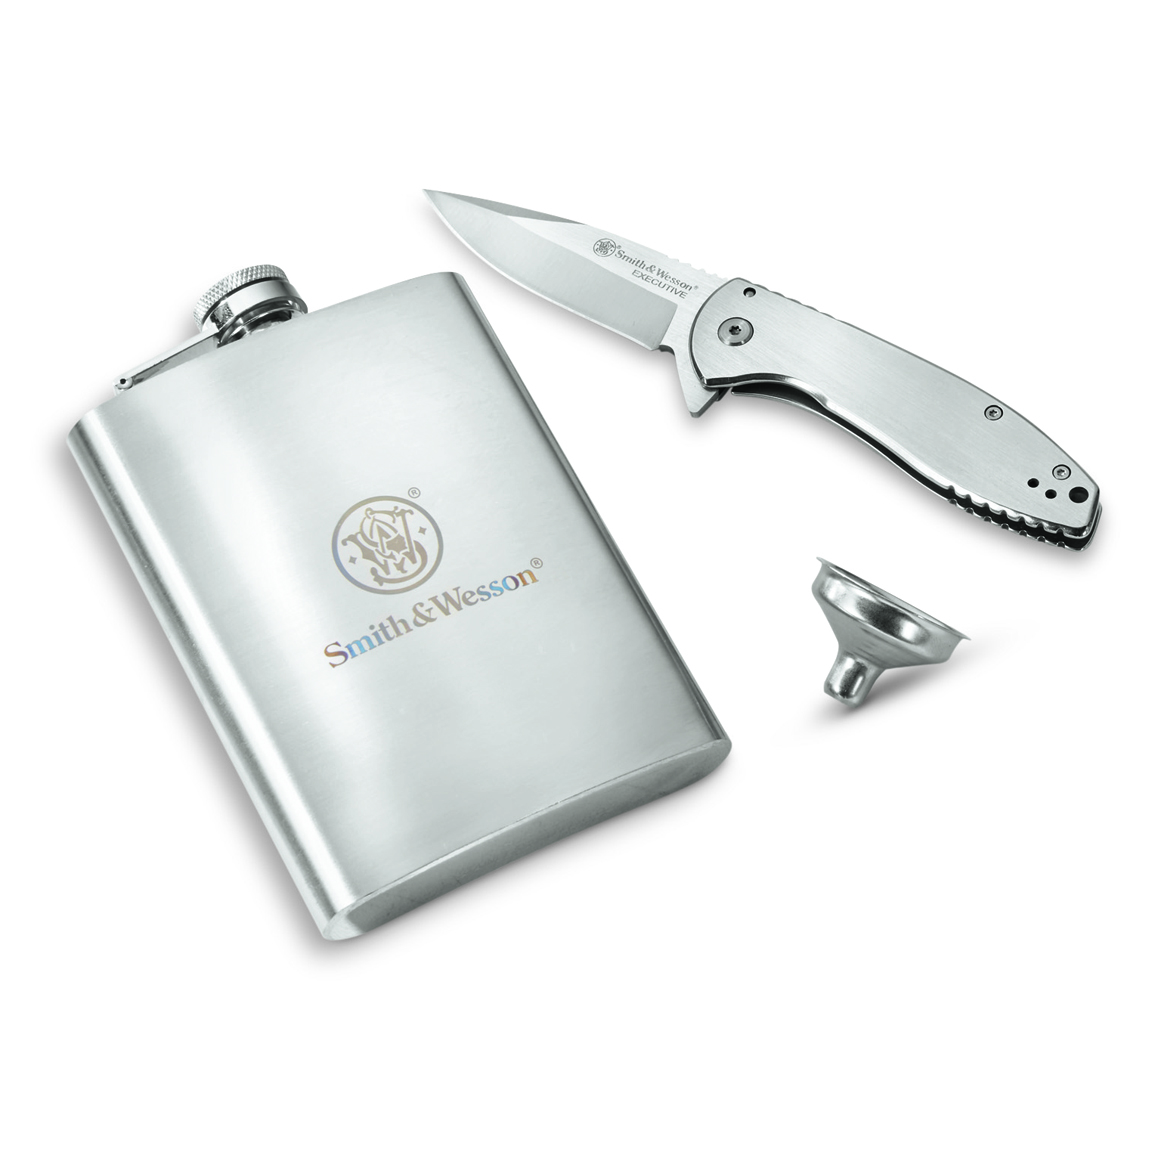 Smith & Wesson Executive Folding Knife with Flask